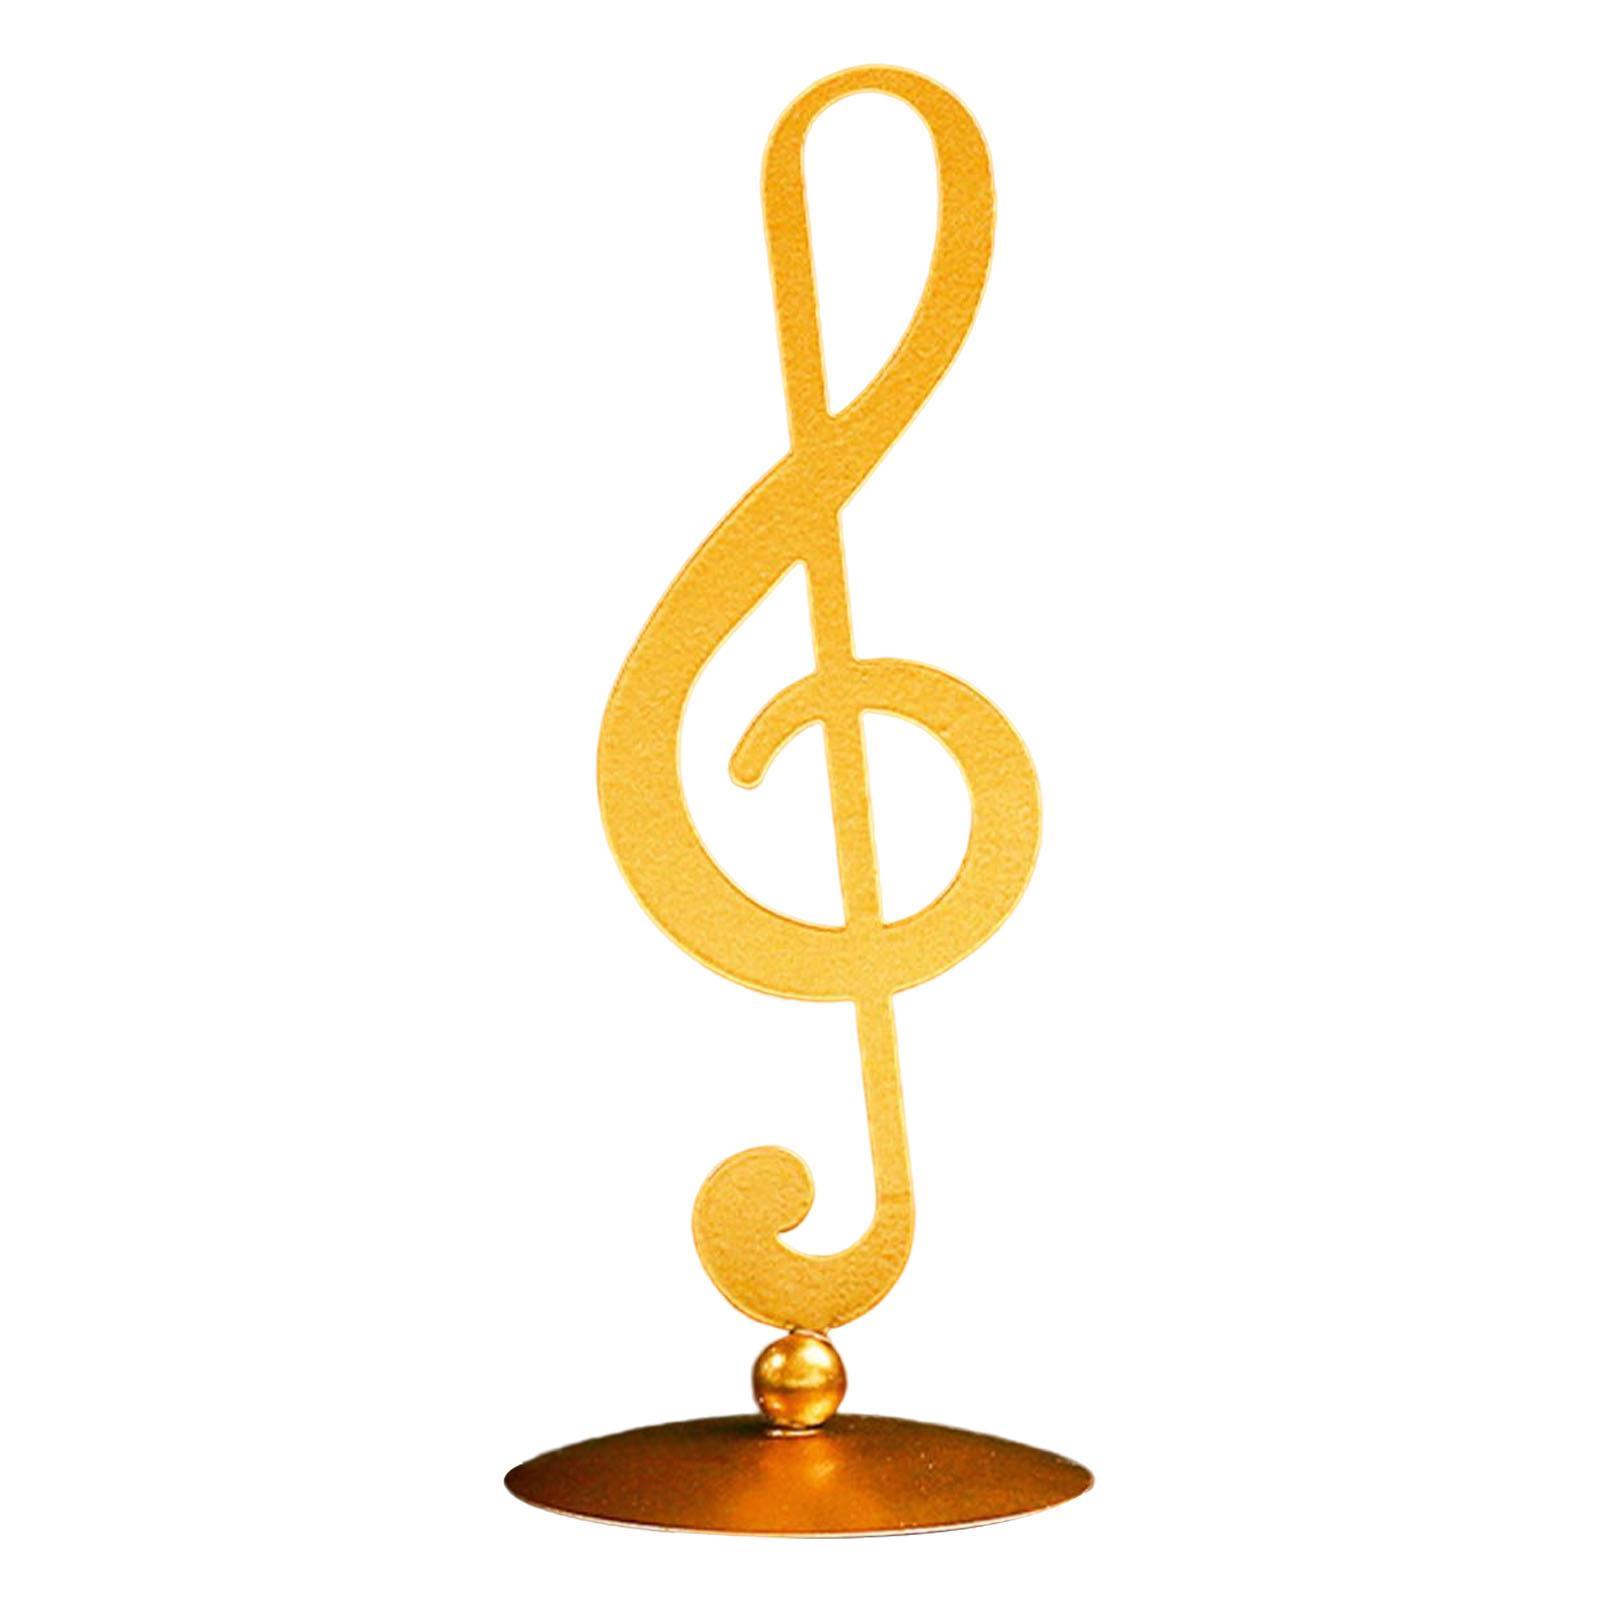 Gold Musical Note Statue Sculpture Music Symbol Decoration for Home Cabinet